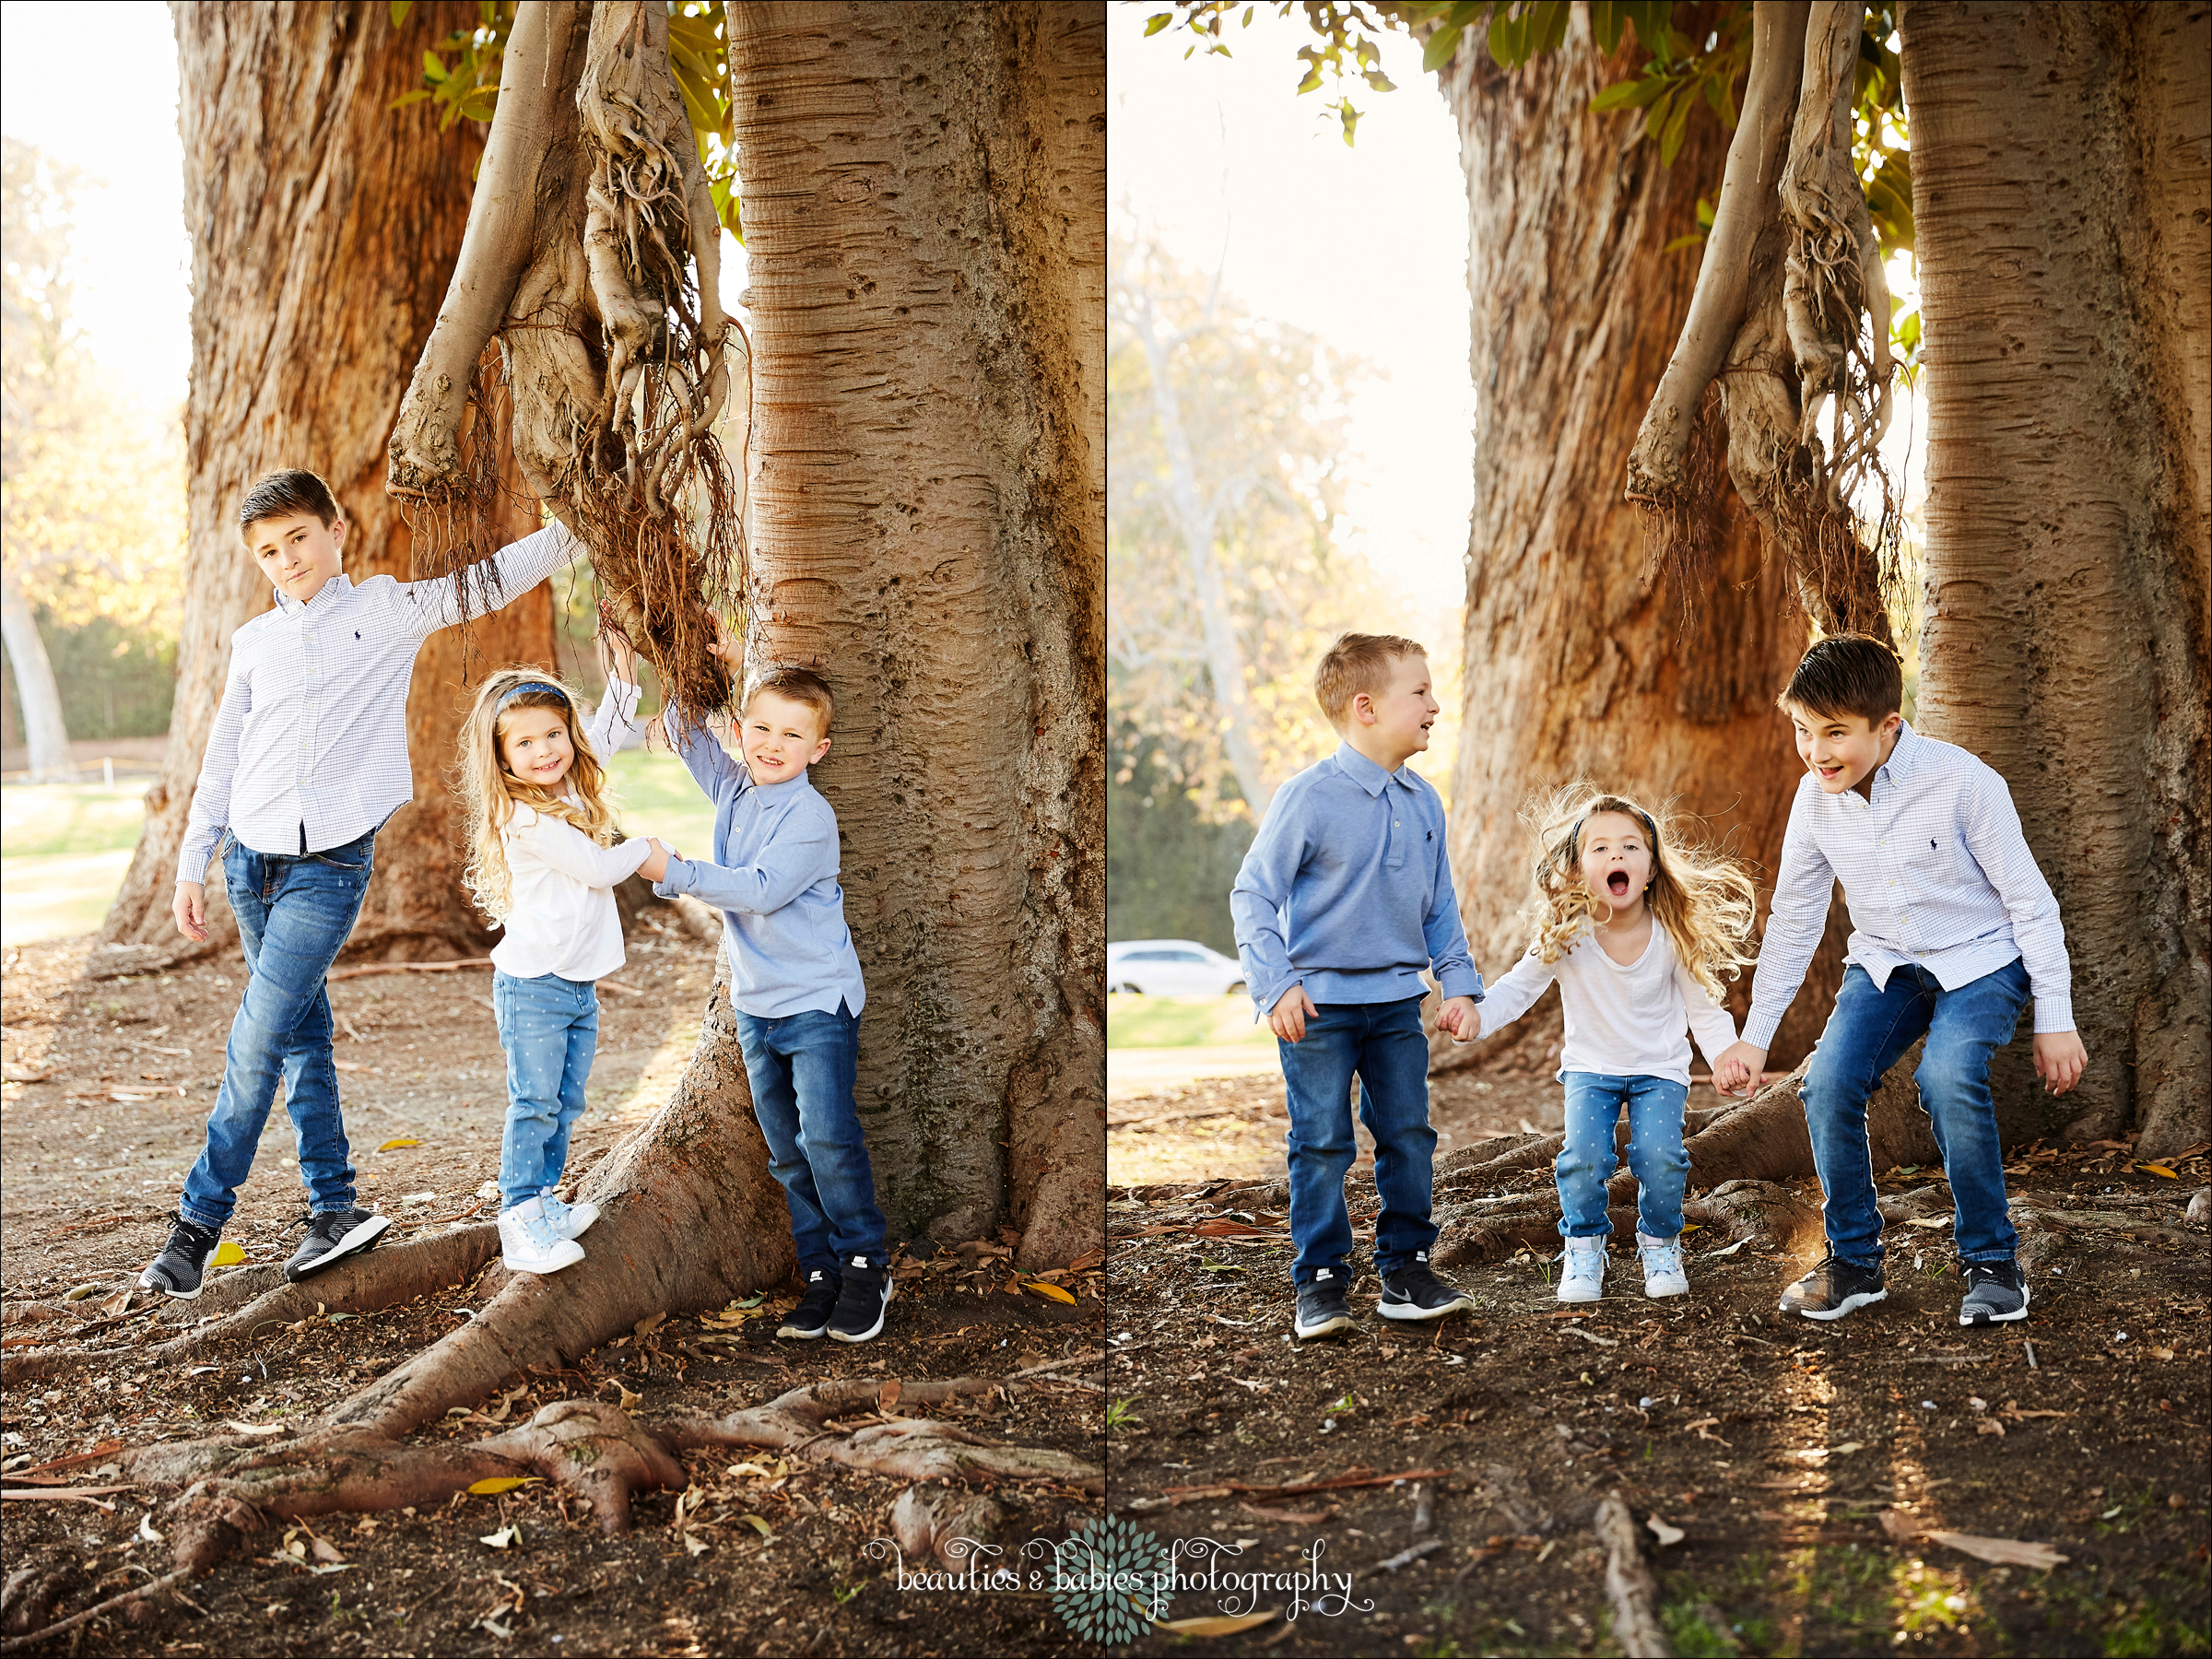 Los Angeles kids and family photography pictures professional children's lifestyle photographer